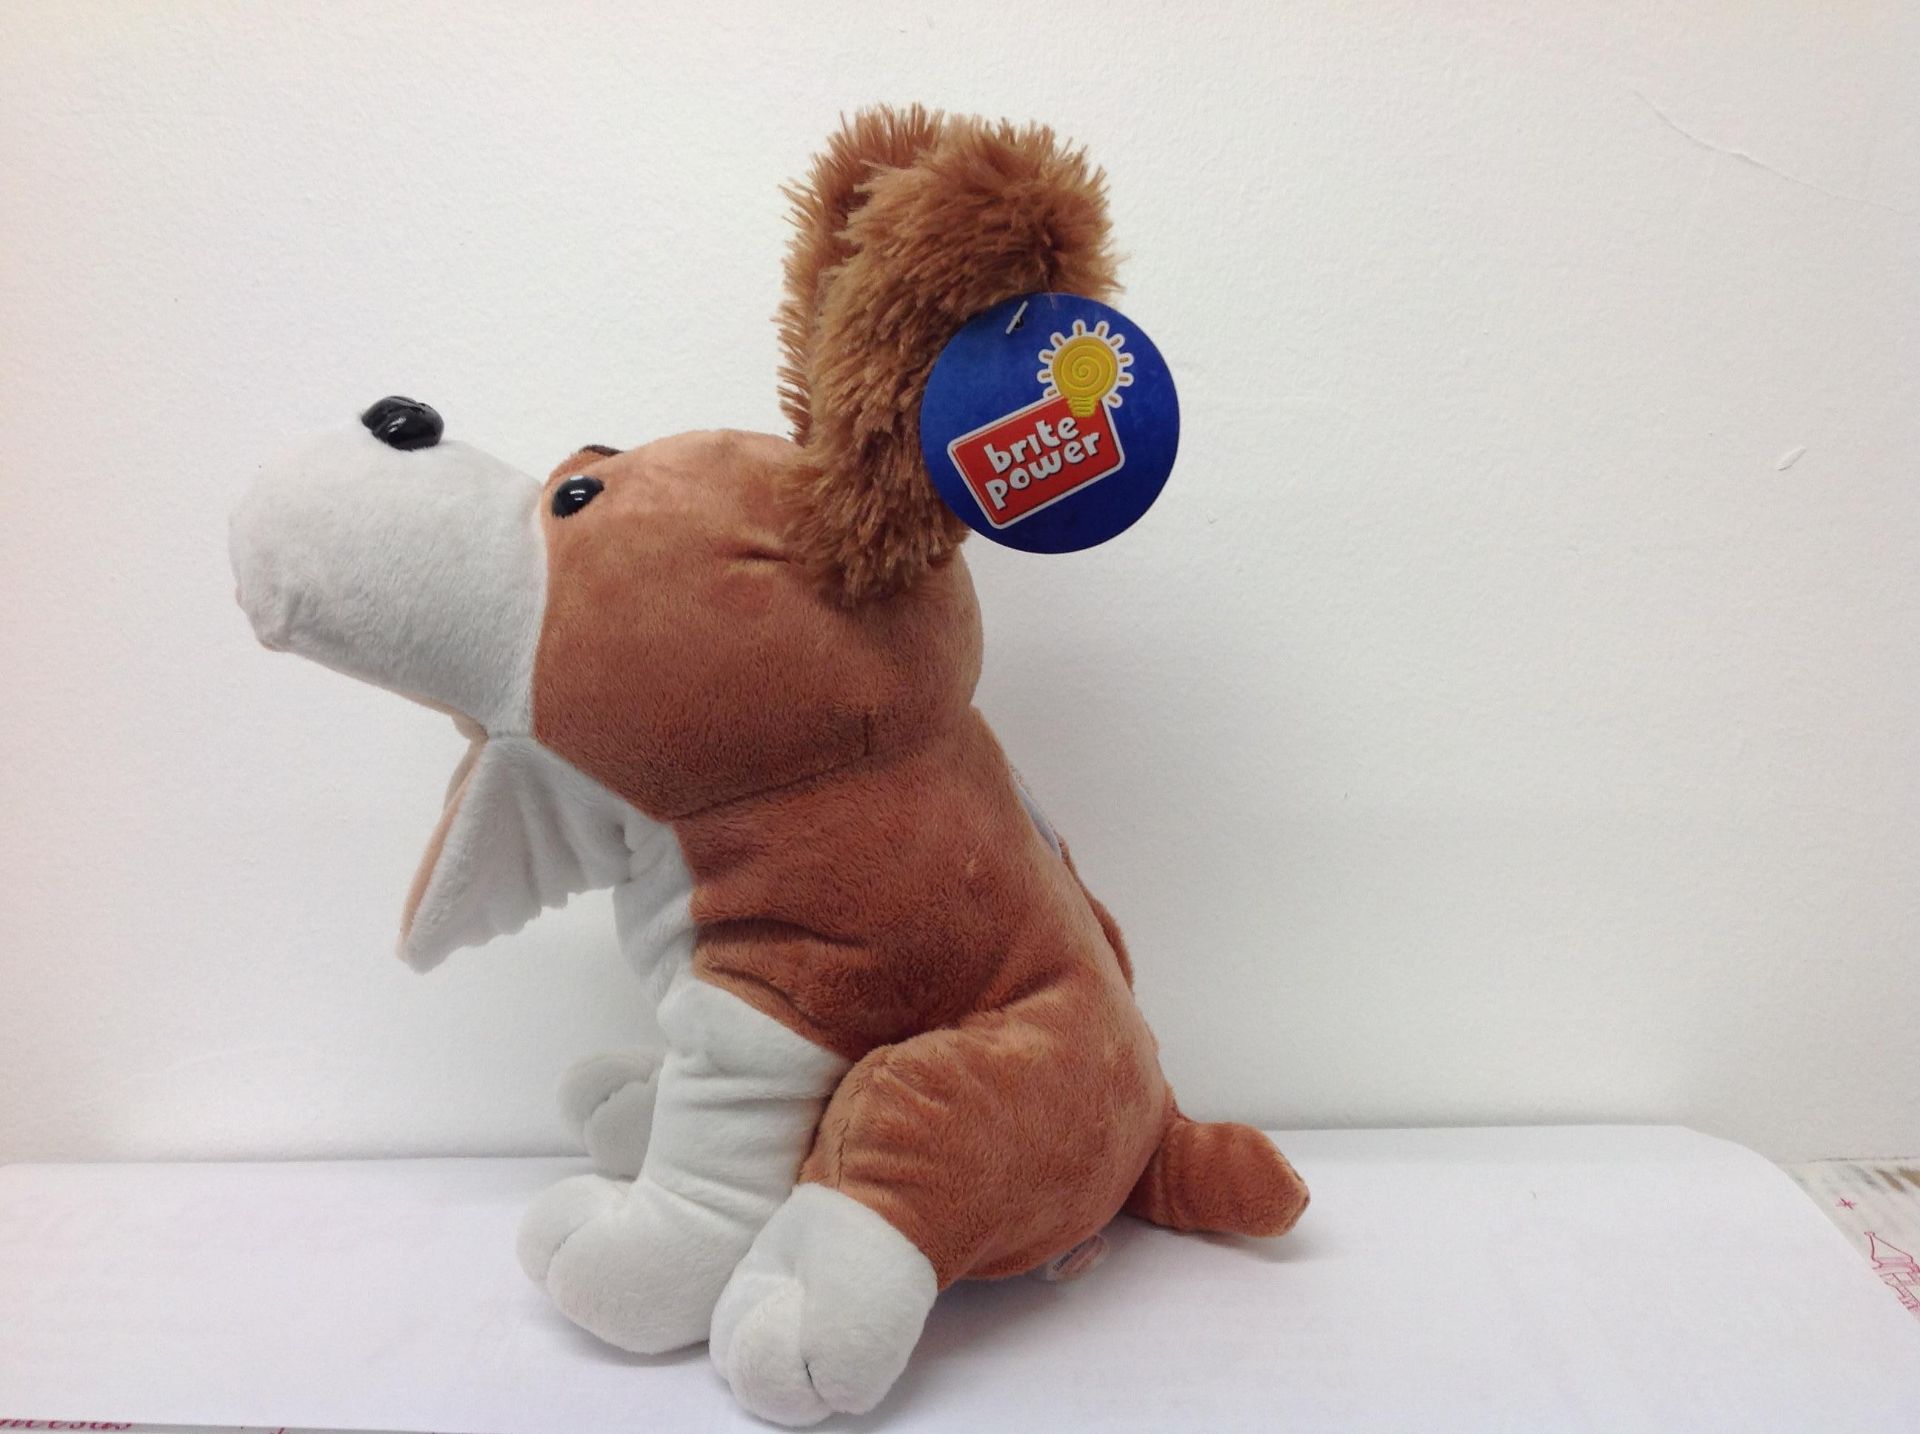 20 x Brite Power Talking Large Dog Hand Puppet. Brand new stock. RRP £19.99 each - Image 2 of 4